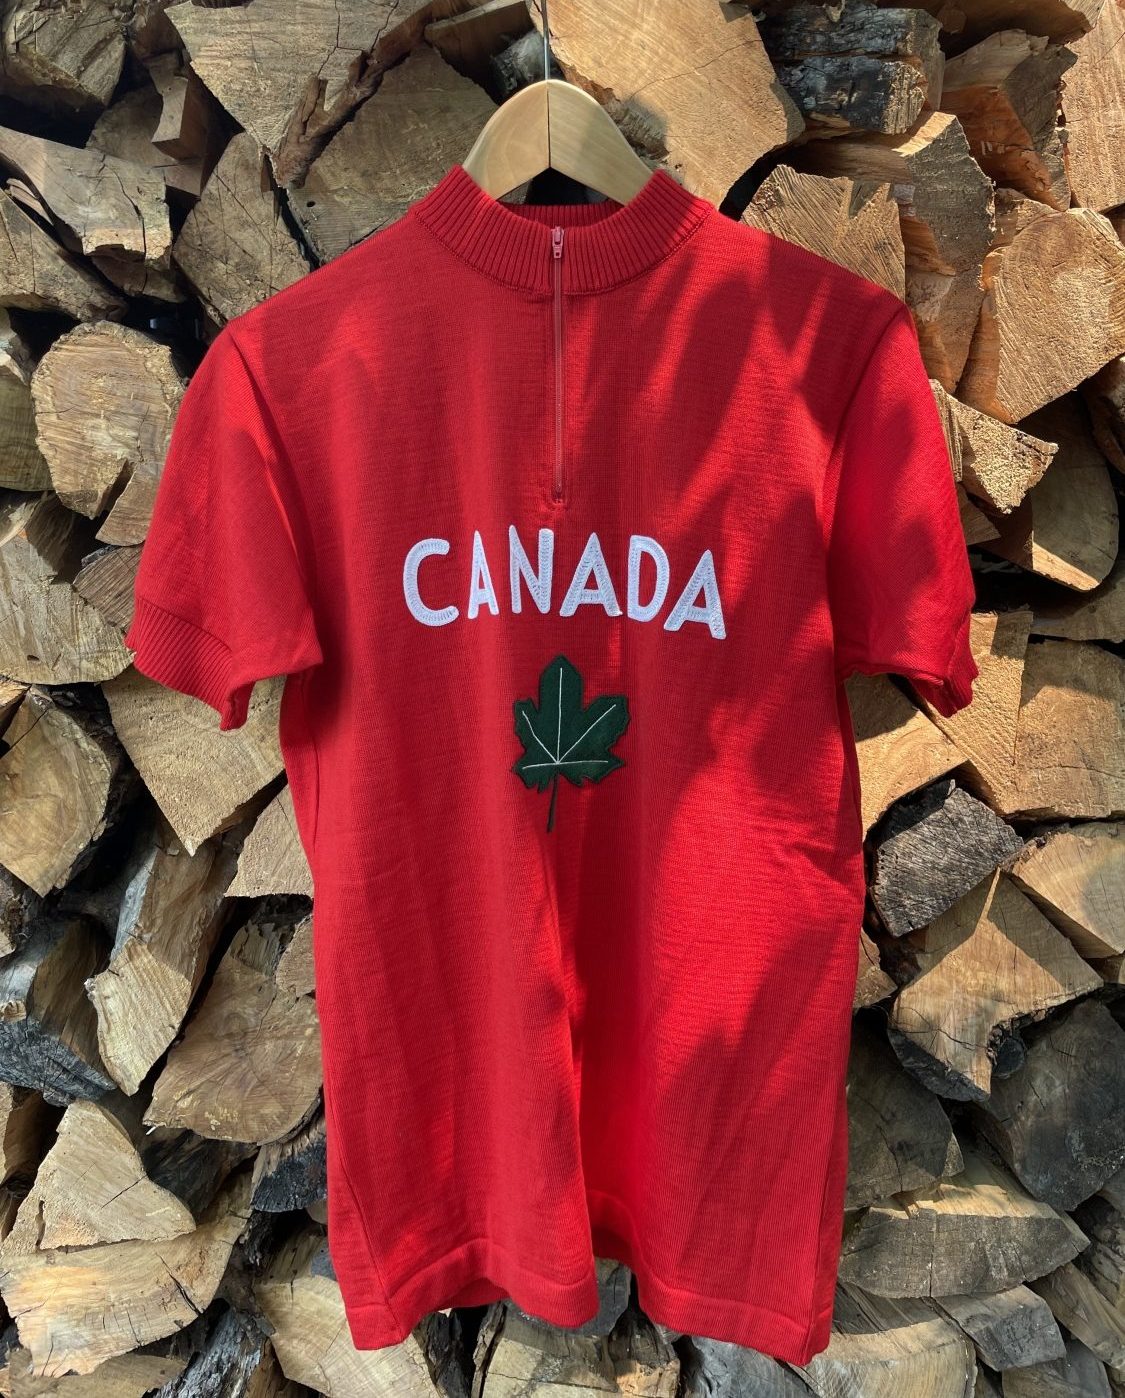 Vintage 1960s Canadian National Cycling Team Merino Wool Jersey ...